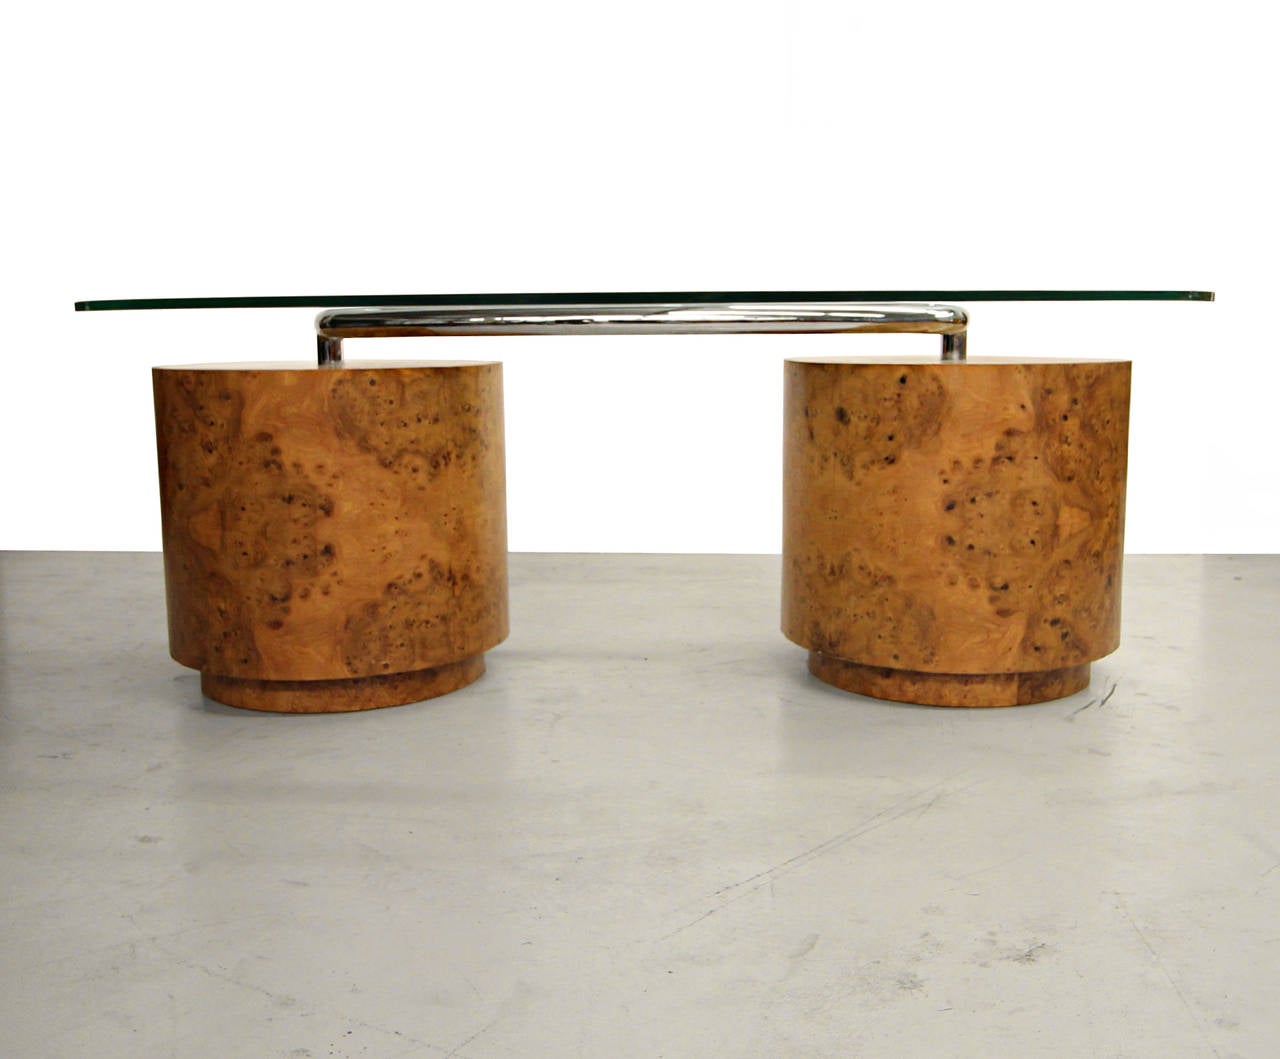 Substantial and gorgeous oval shaped Mid Century Deco Style executive desk. Desk is comprised of two round burl wood pedestals joined by tubular chrome hosting a floating glass top. Each pedestal has a set of drawers with expertly crafted cherry